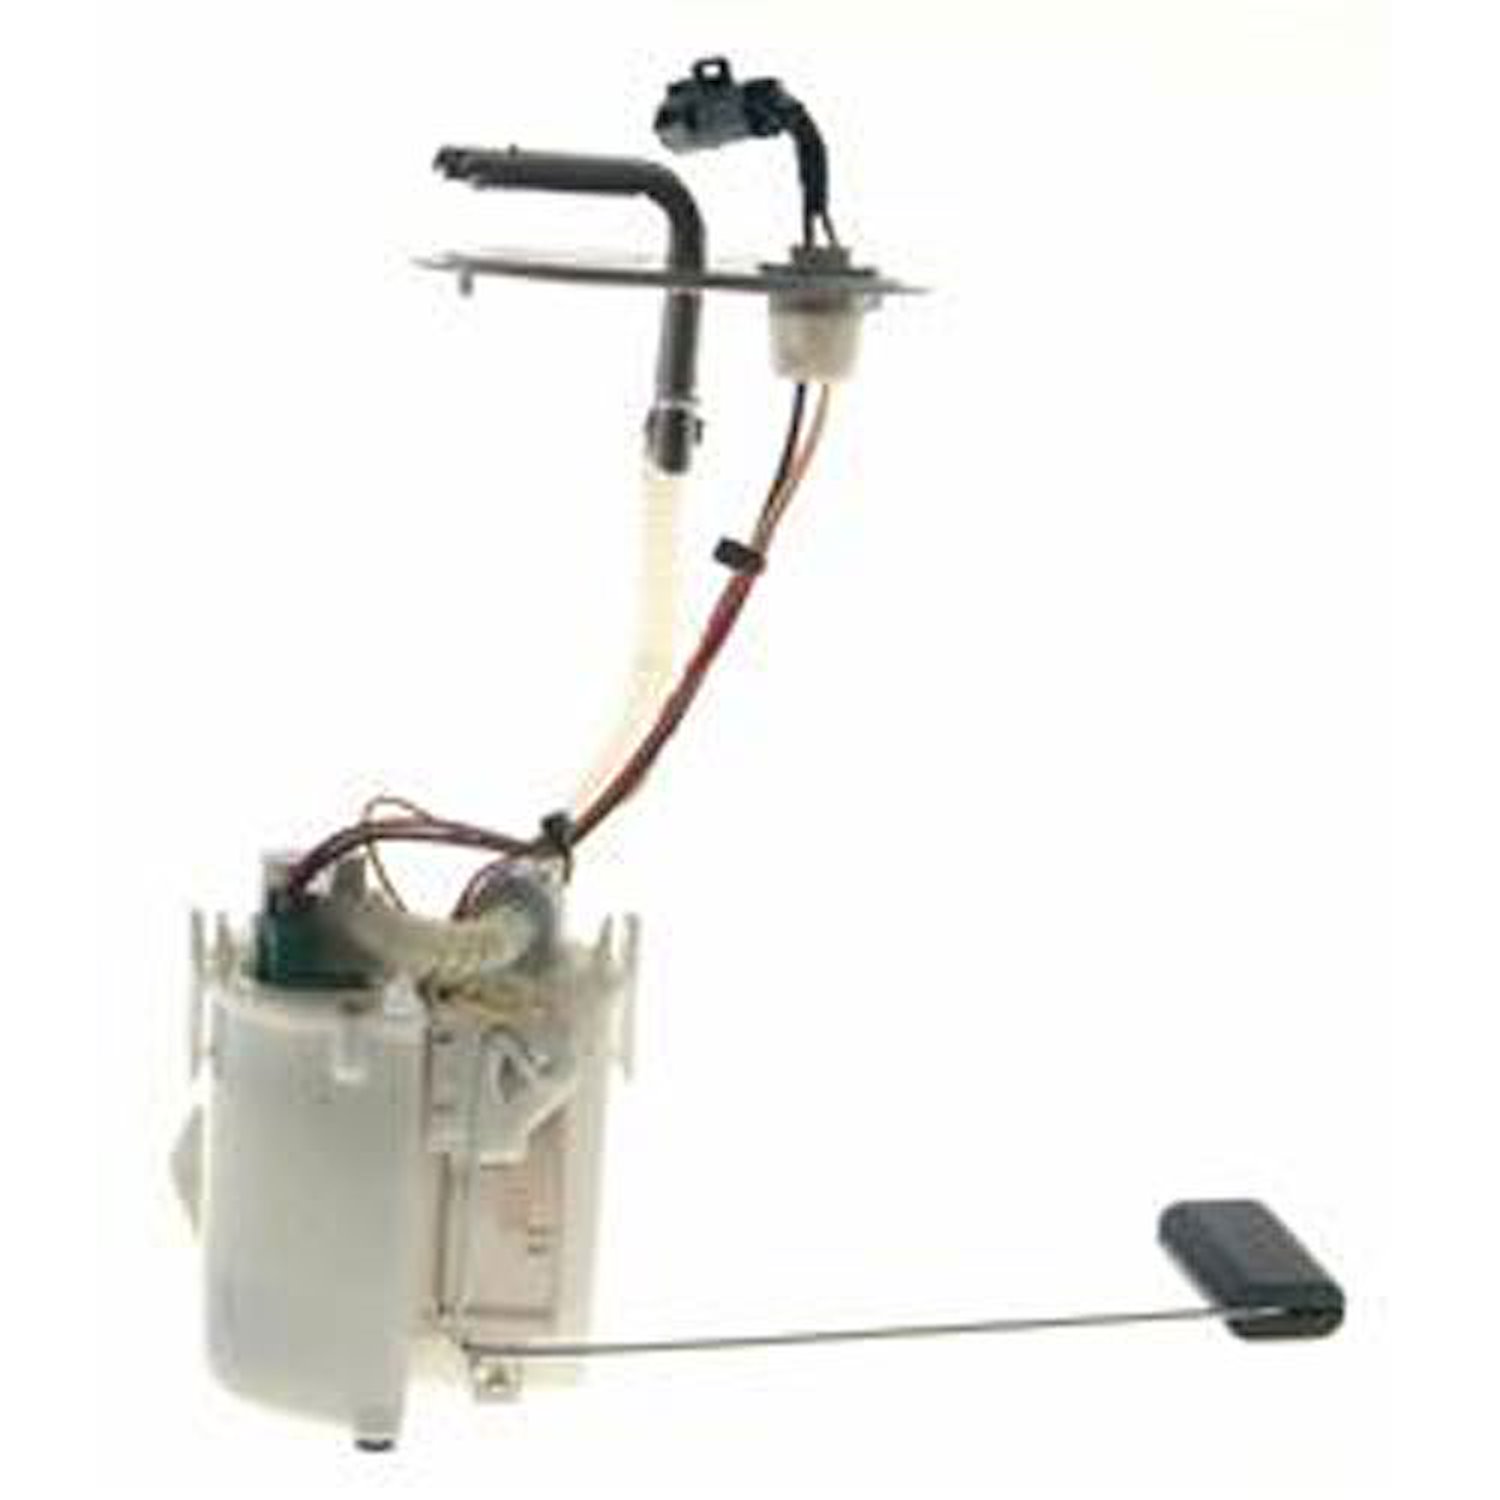 OE Ford Replacement Electric Fuel Pump Module Assembly 2004-06 Ford Escape 2.3L 4 Cyl/3.0L V6